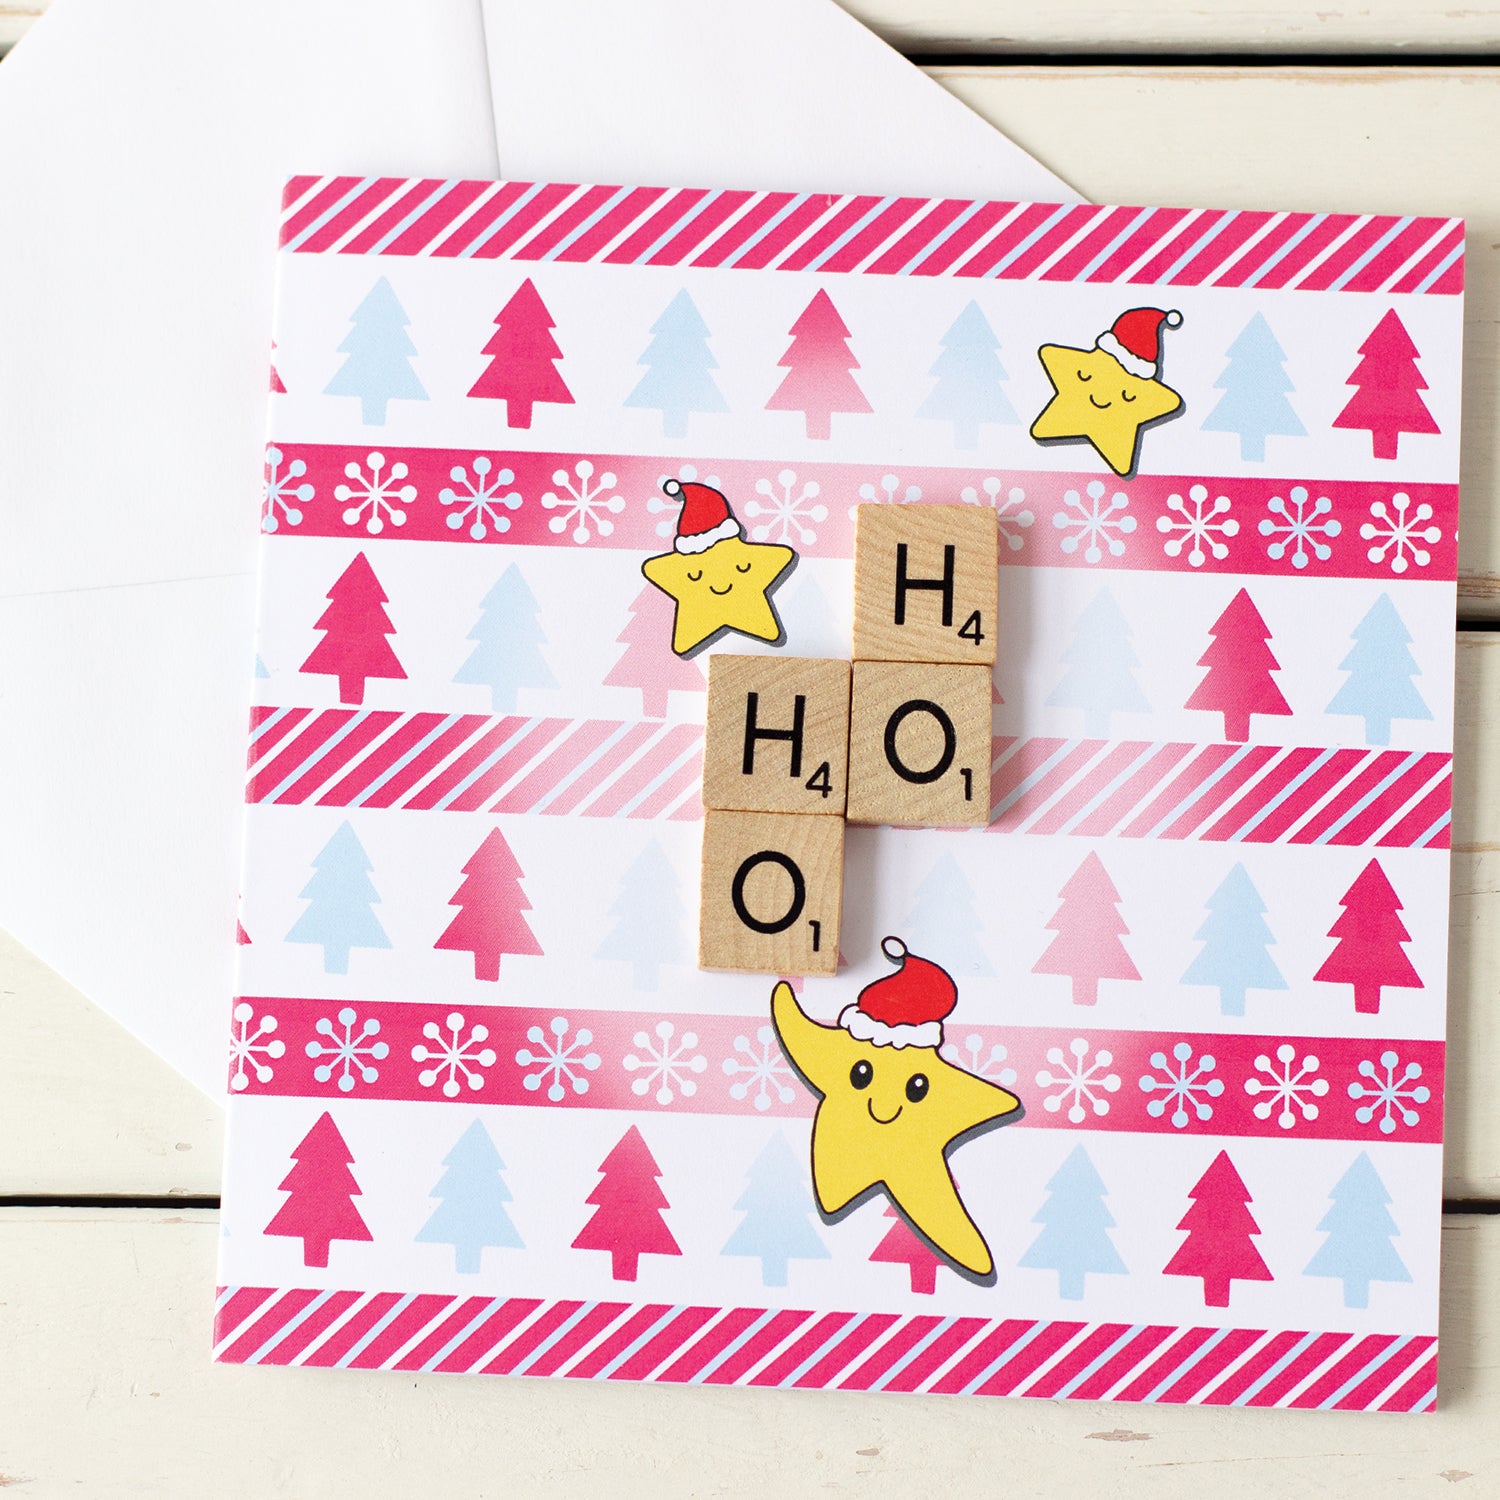 Cute Scrabble Inspired Christmas Card and envelope